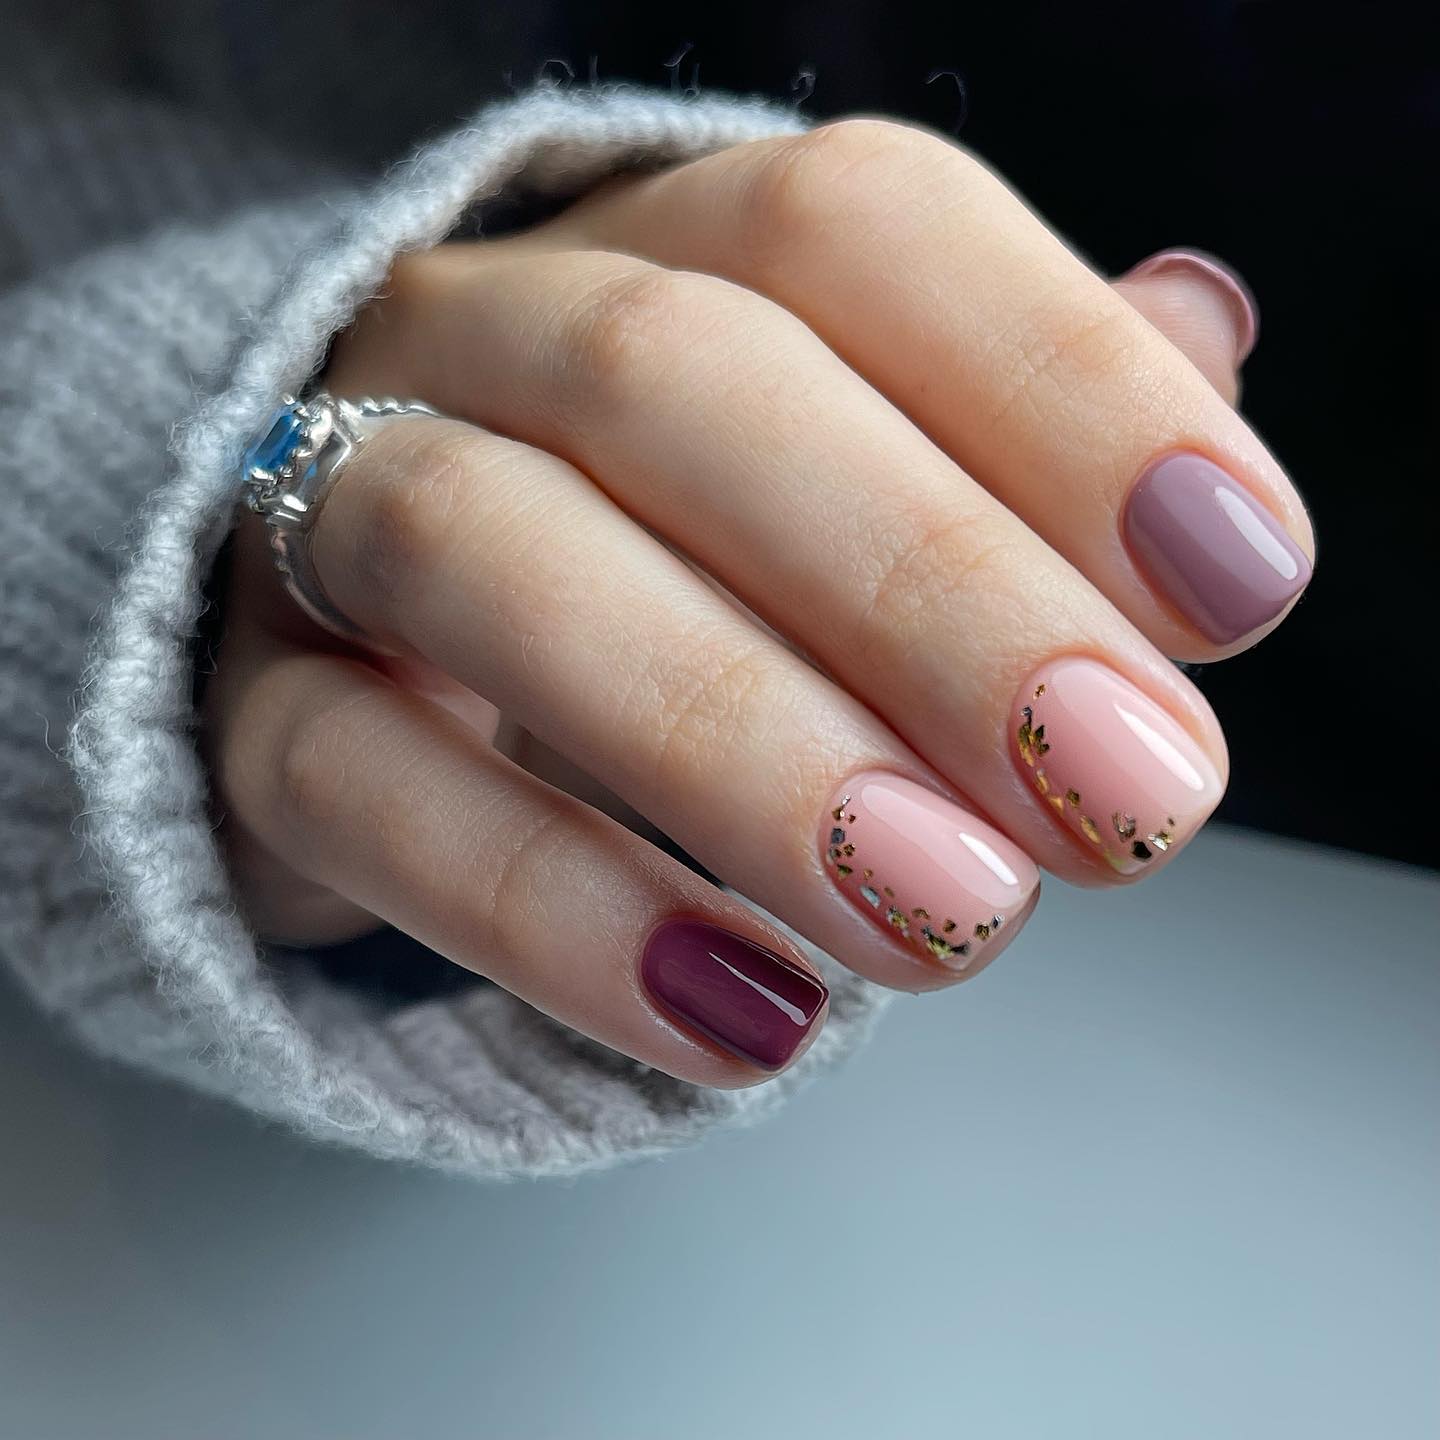 50+ Cute Short Nail Designs You’ll Want To Try Today images 9